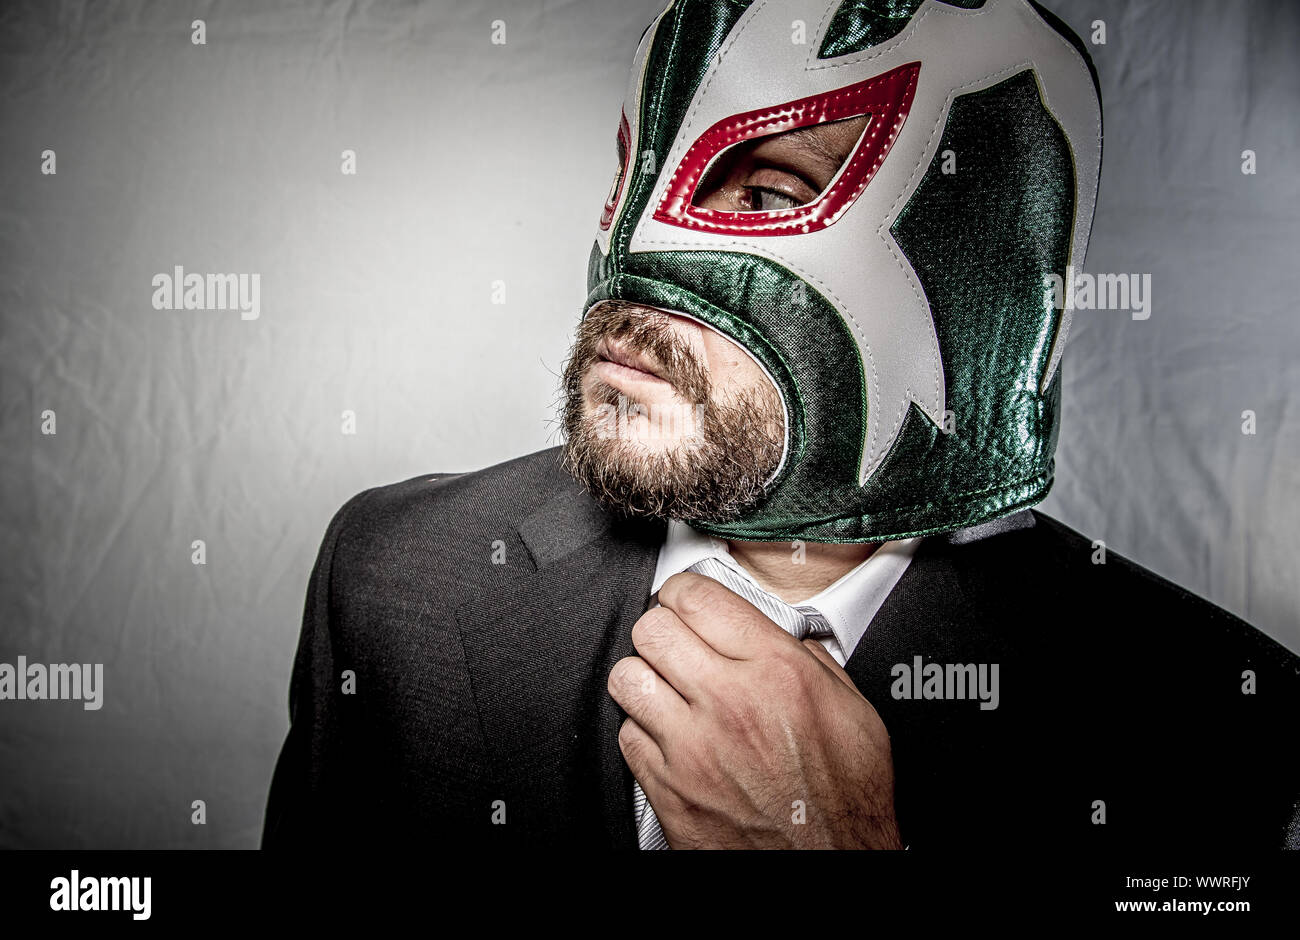 Work, Angry businessman with mask of Mexican fighter, dressed in suit and tie Stock Photo